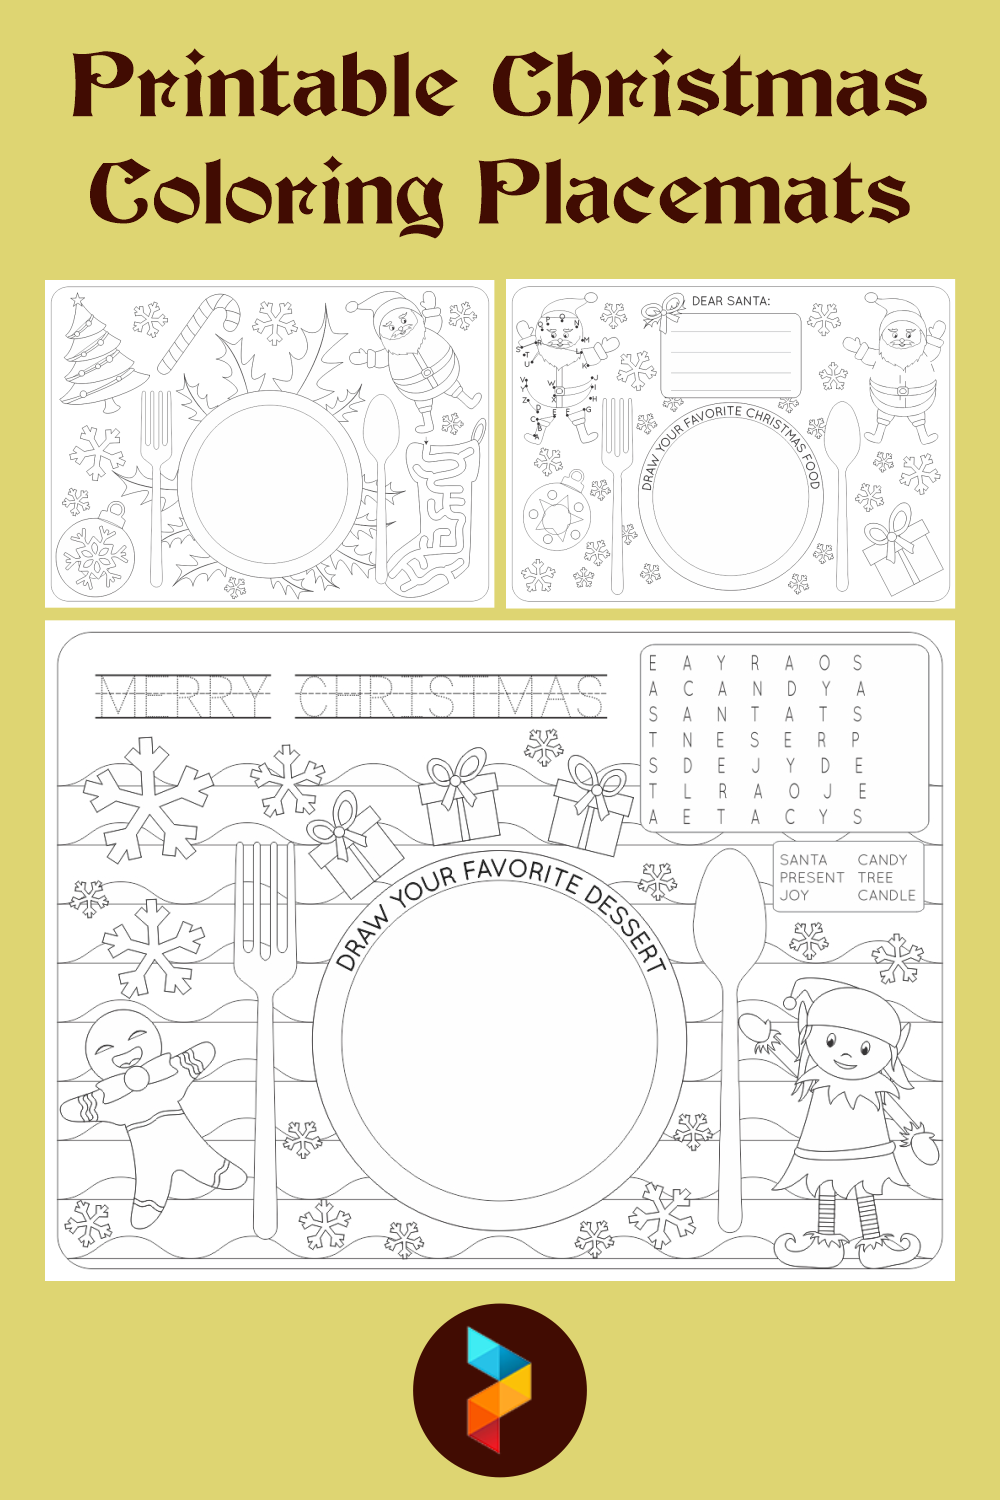 Printable Christmas Coloring Placemats